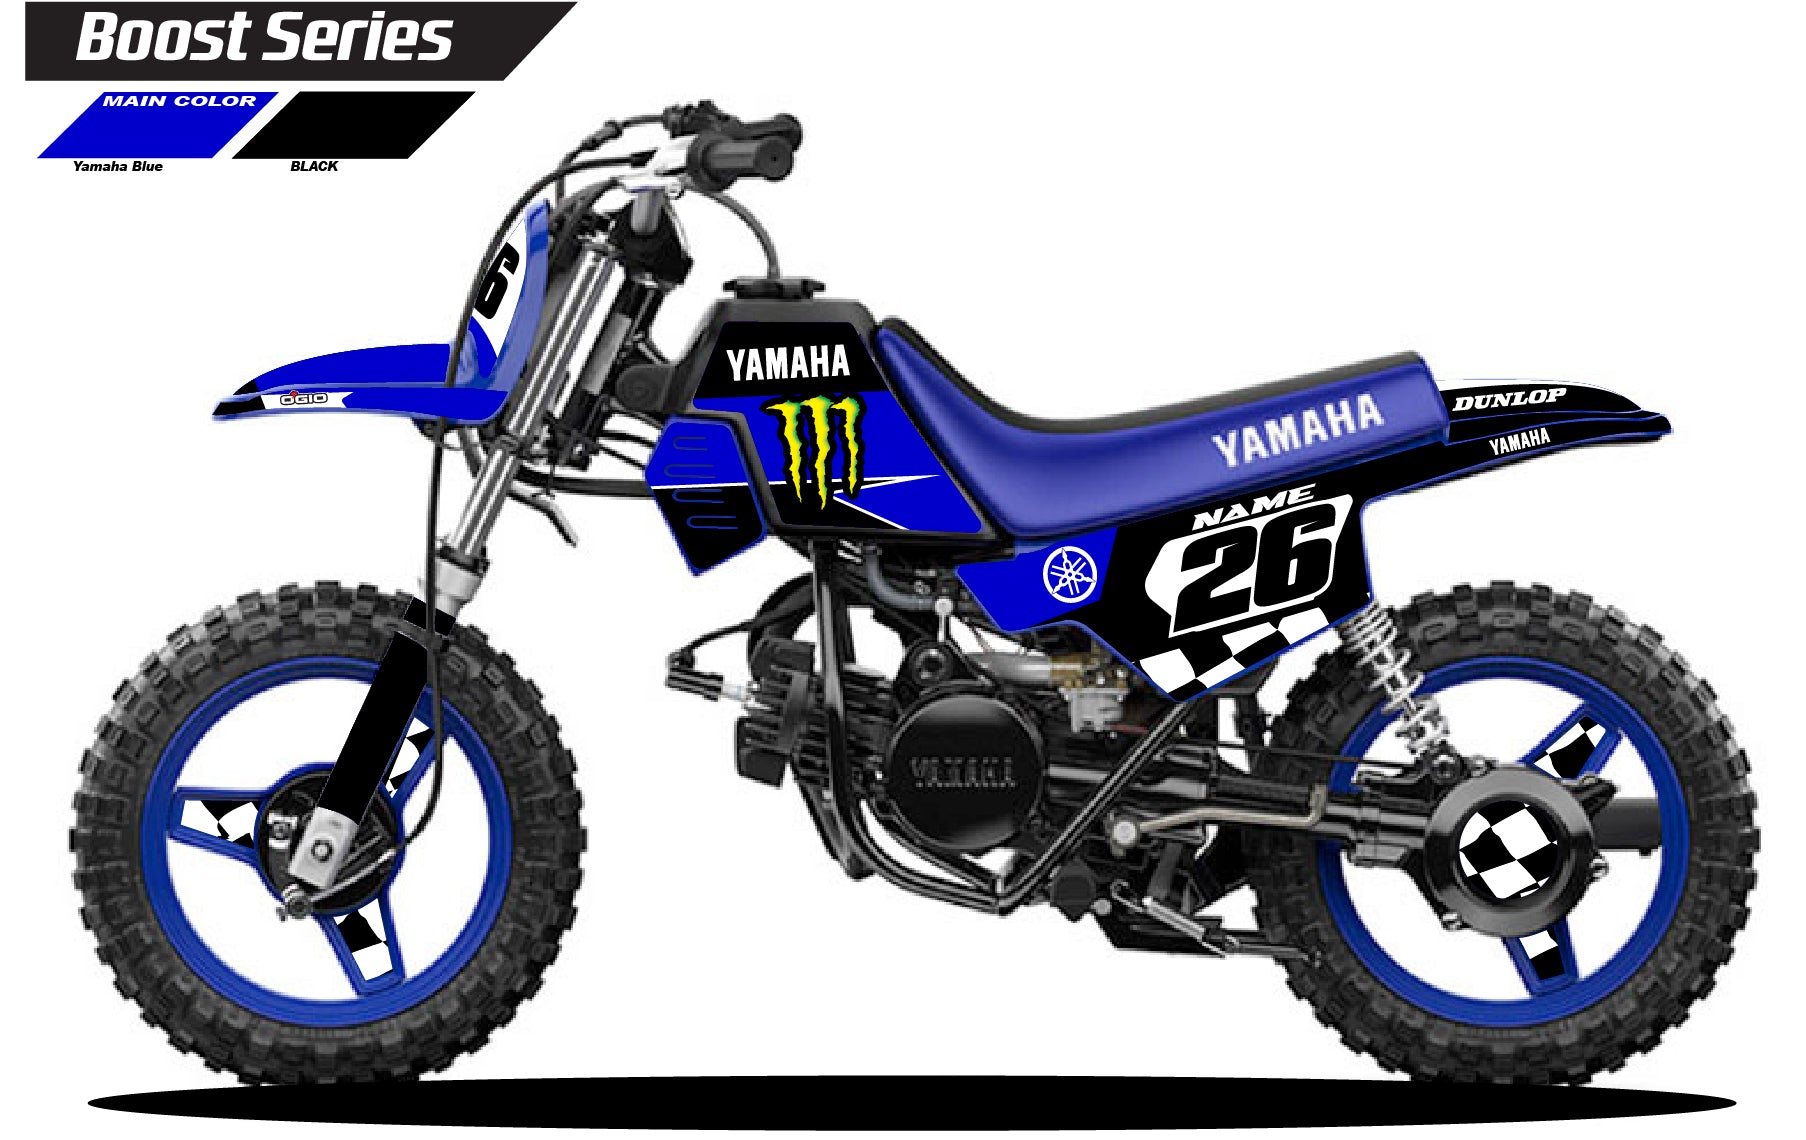 PW50 Graphics- Boost Series